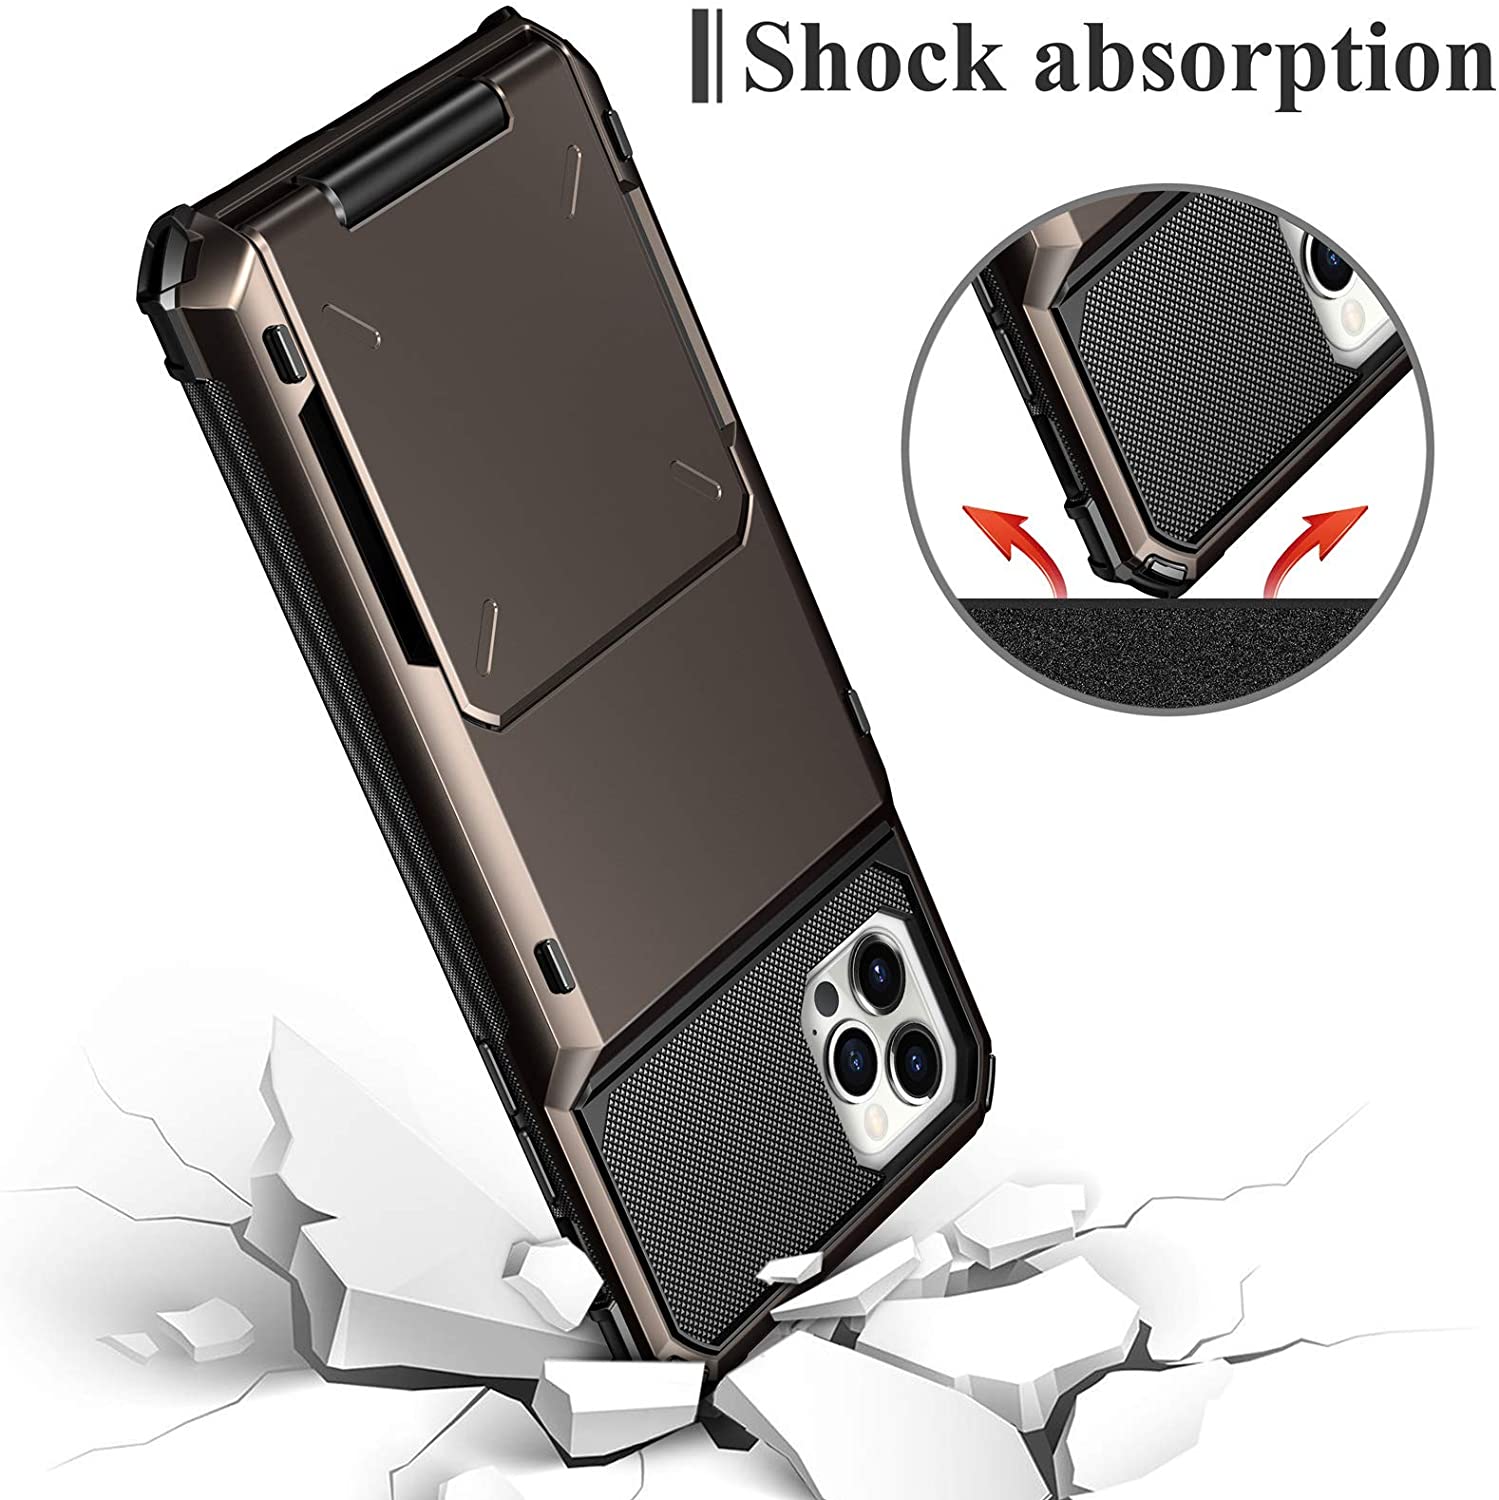 Case For iPhone With Card Slots